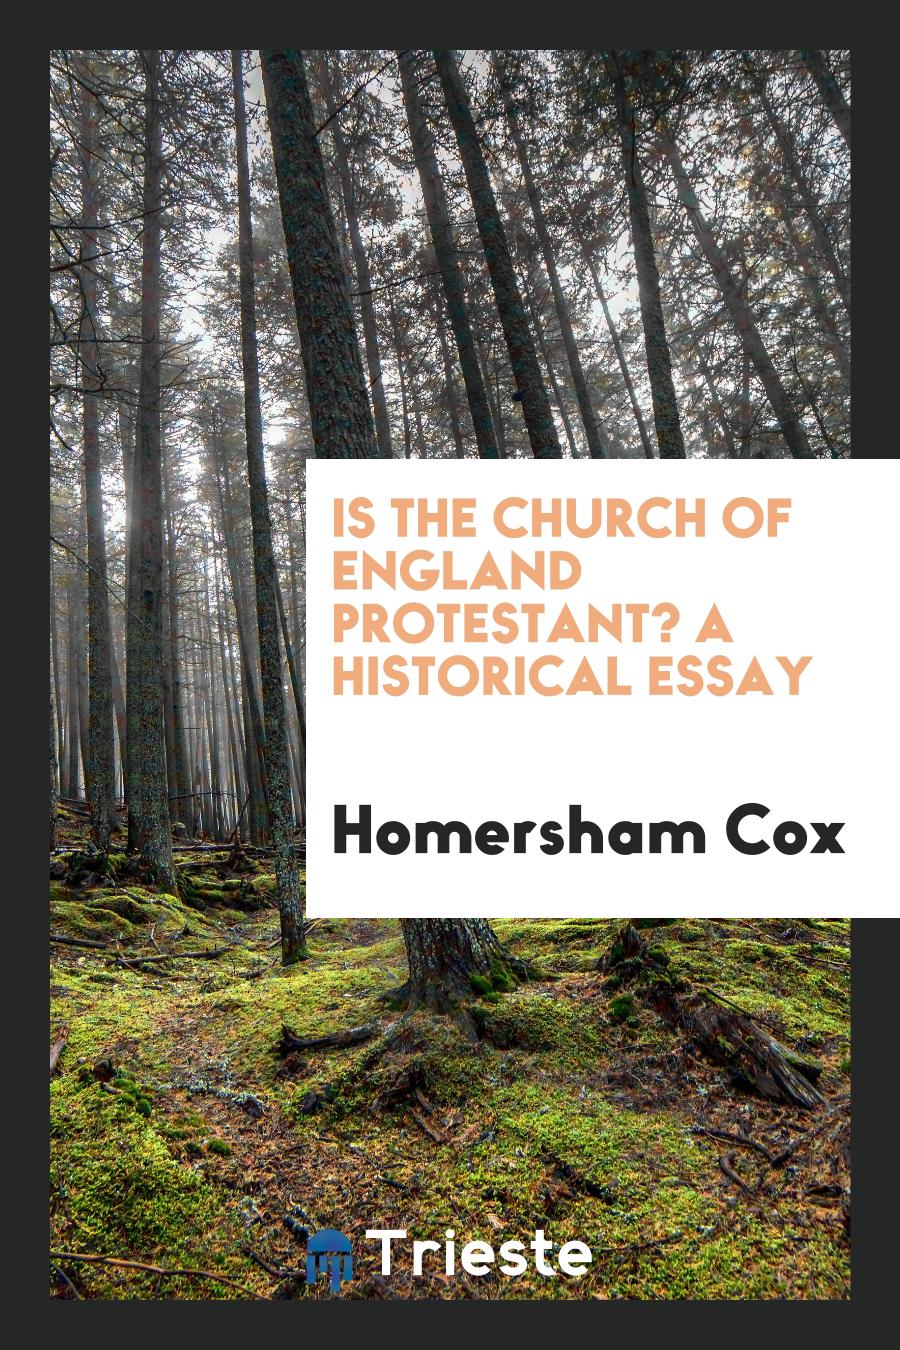 Is the Church of England Protestant? A historical essay